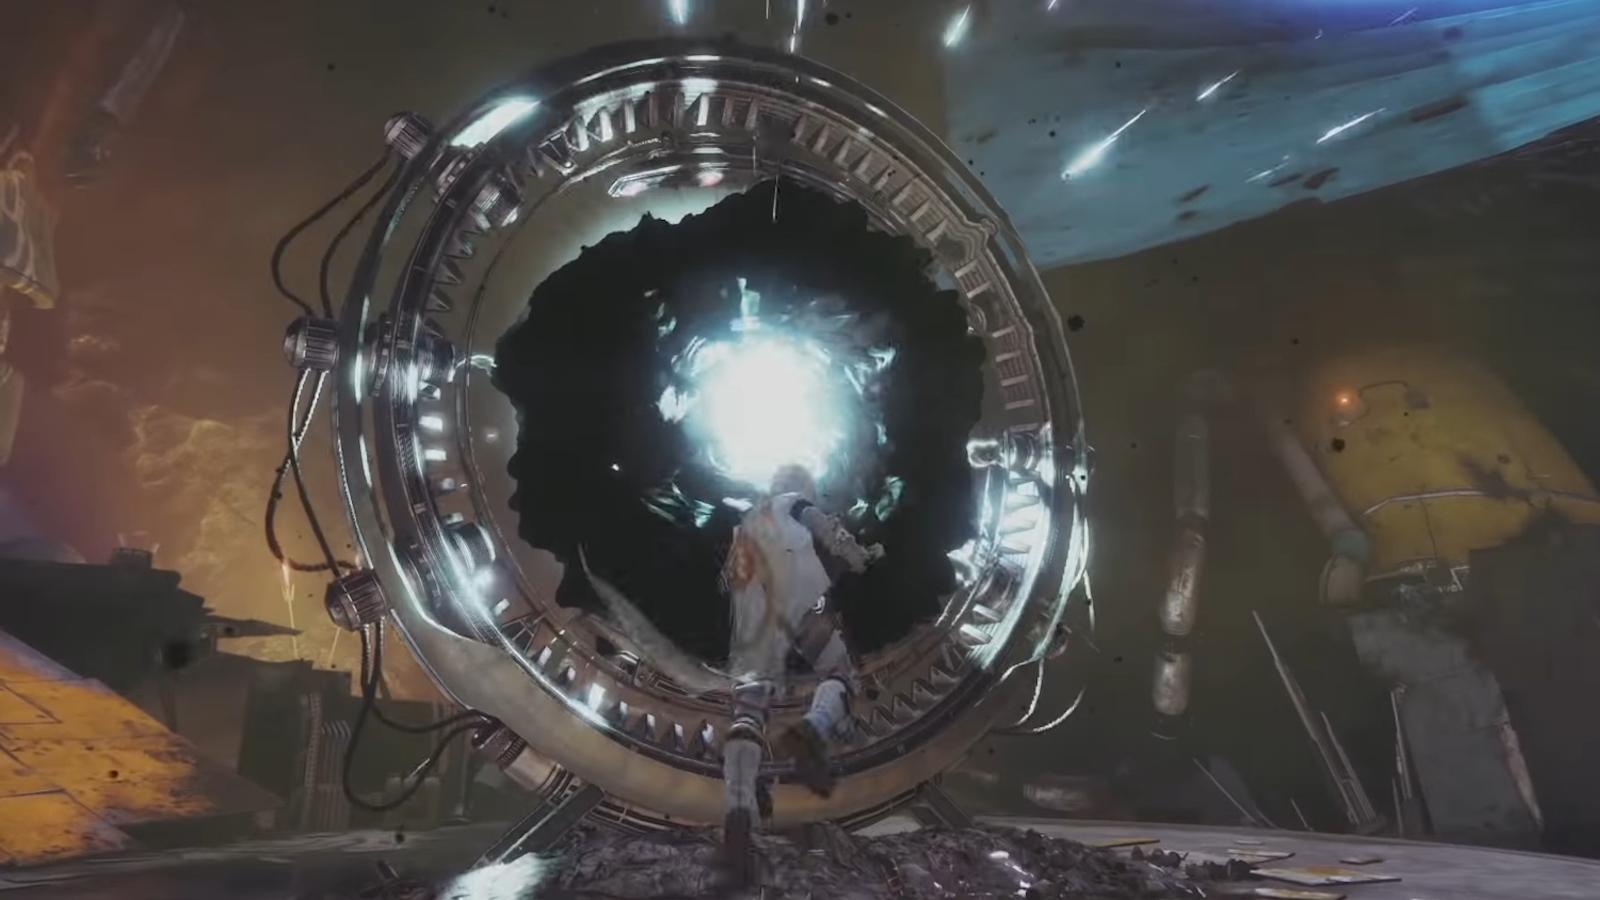 Eager player about to invade enemy team as seen in Destiny 2 Gambit trailer